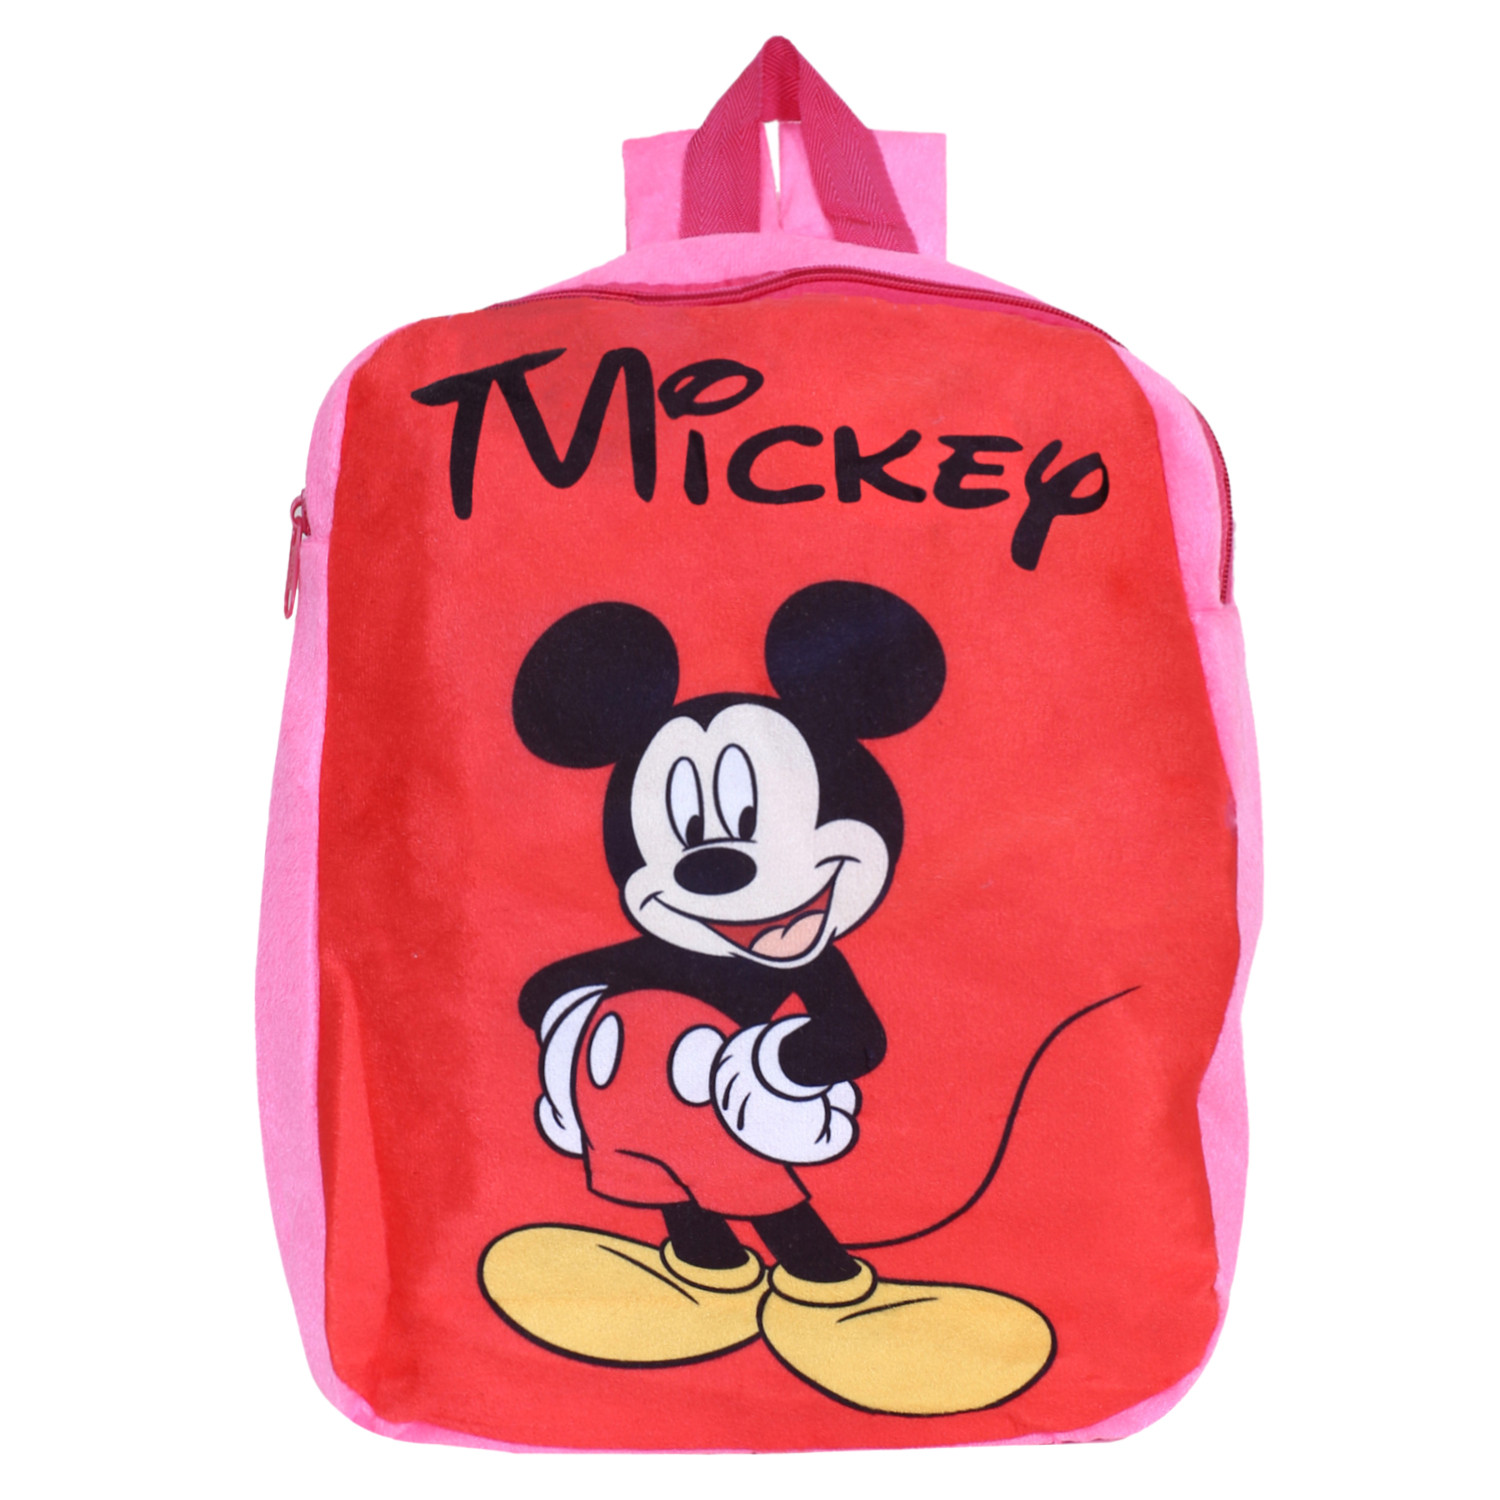 Kuber Industries Disney Mickey Plush Backpack|2 Compartment Stitched Velvet School Bag|Durable Toddler Haversack For Travel,School with Zipper Closure (Red & Pink)